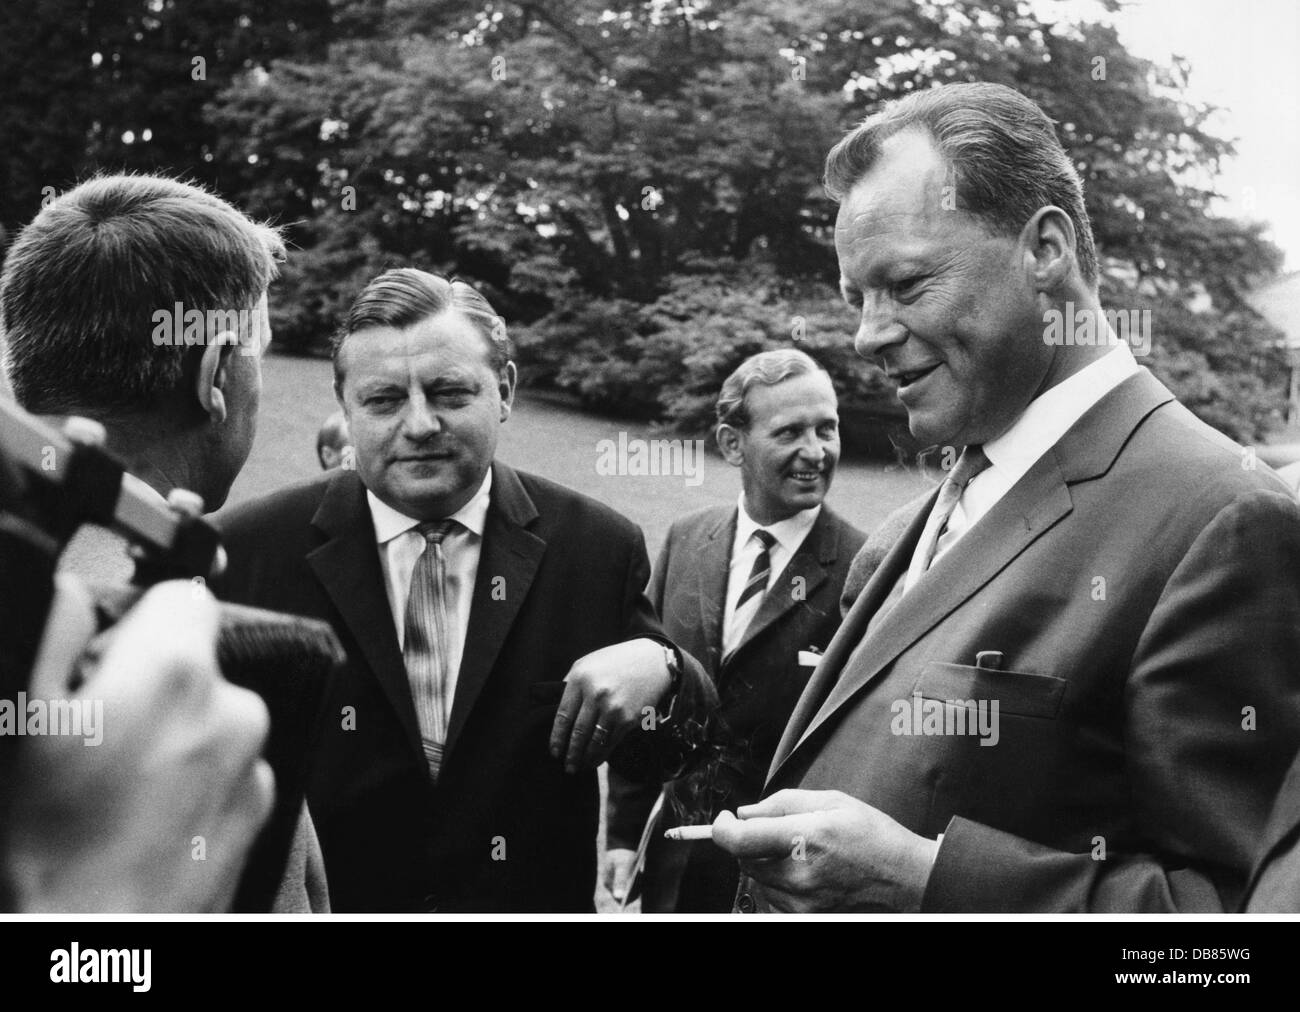 Strauss, Franz Josef, 6.9.1915 - 3.10.1988, German politician (CSU), Federal Minister of Defence 16.10.1956 - 9.1.1963, with the governing mayor of Berlin Willy Brandt (SPD), event at castle Tutzing, 11.7.1961, Stock Photo